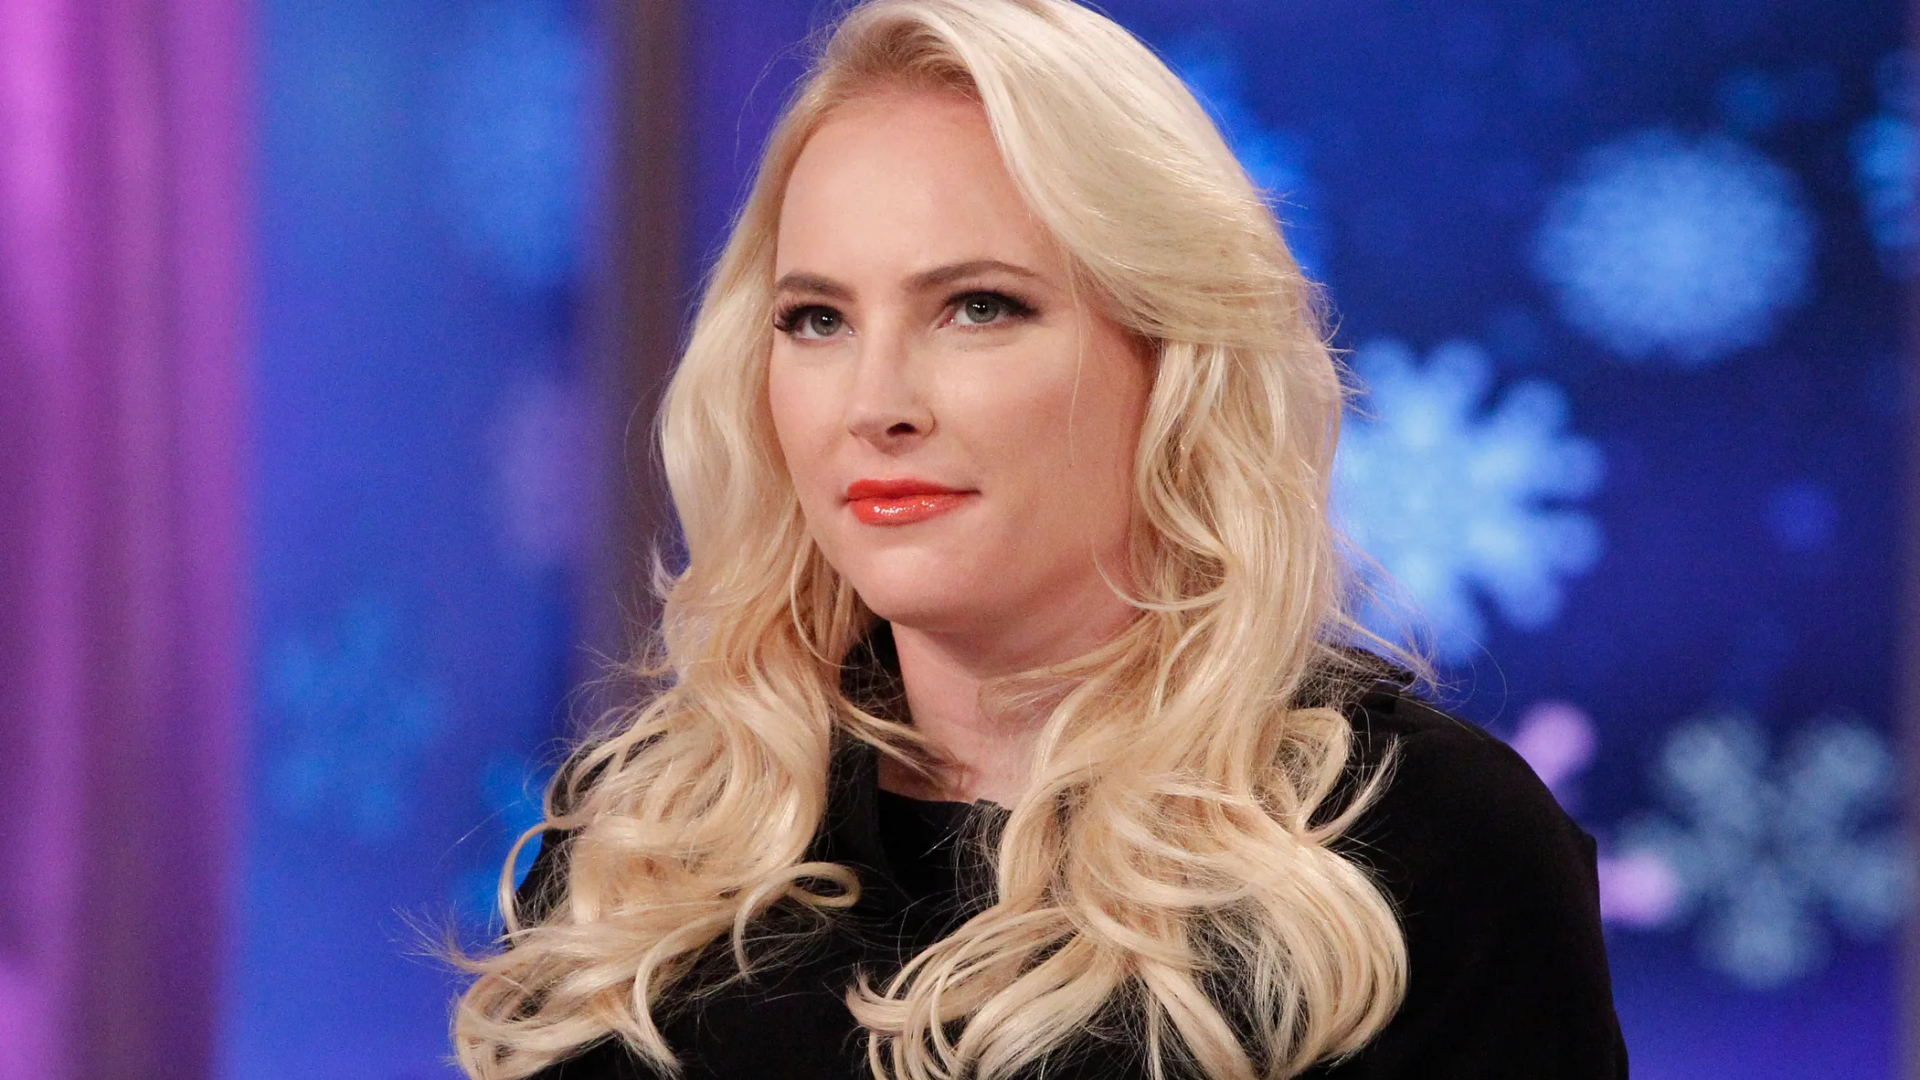 Who is Meghan McCain: Biography, Career and Personal Life